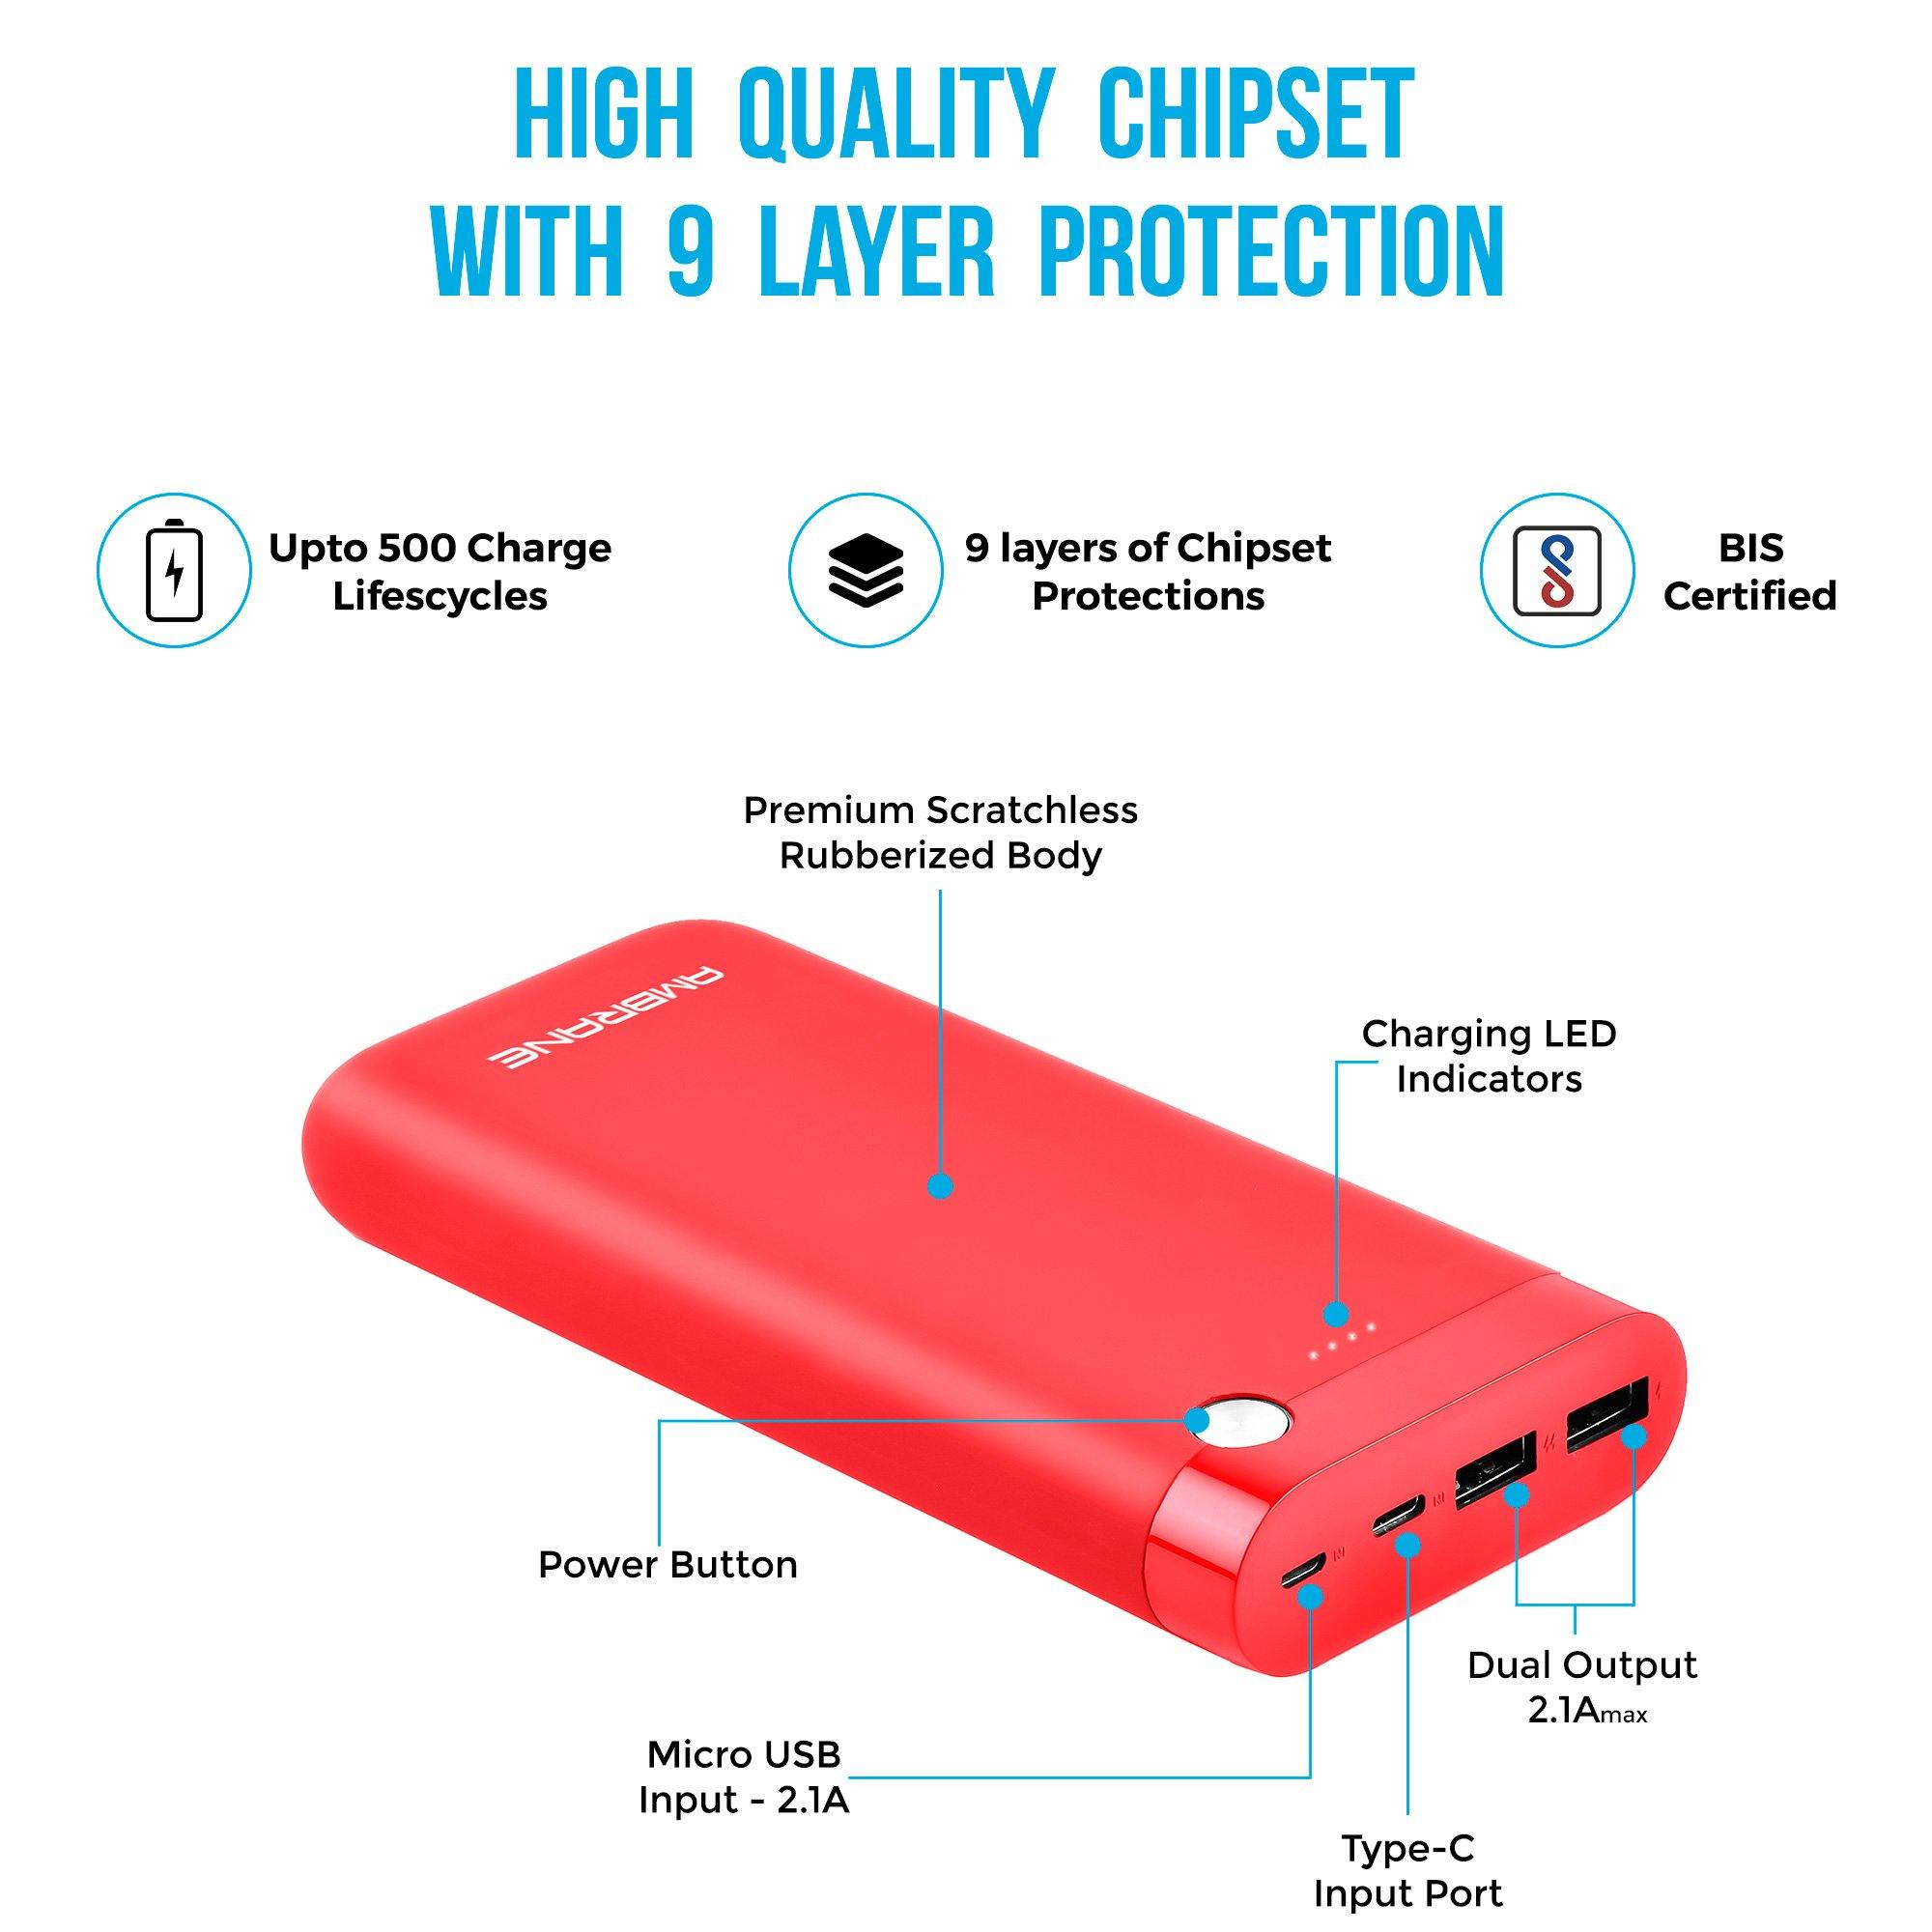 PP-20 20000 mAh Li-Polymer Powerbank with Dual Micro/ Type-C Input Fast Charging for Smartphone, Smart Watches, Neckbands & Other Devices, Made In India(Red) - AmbraneIndia